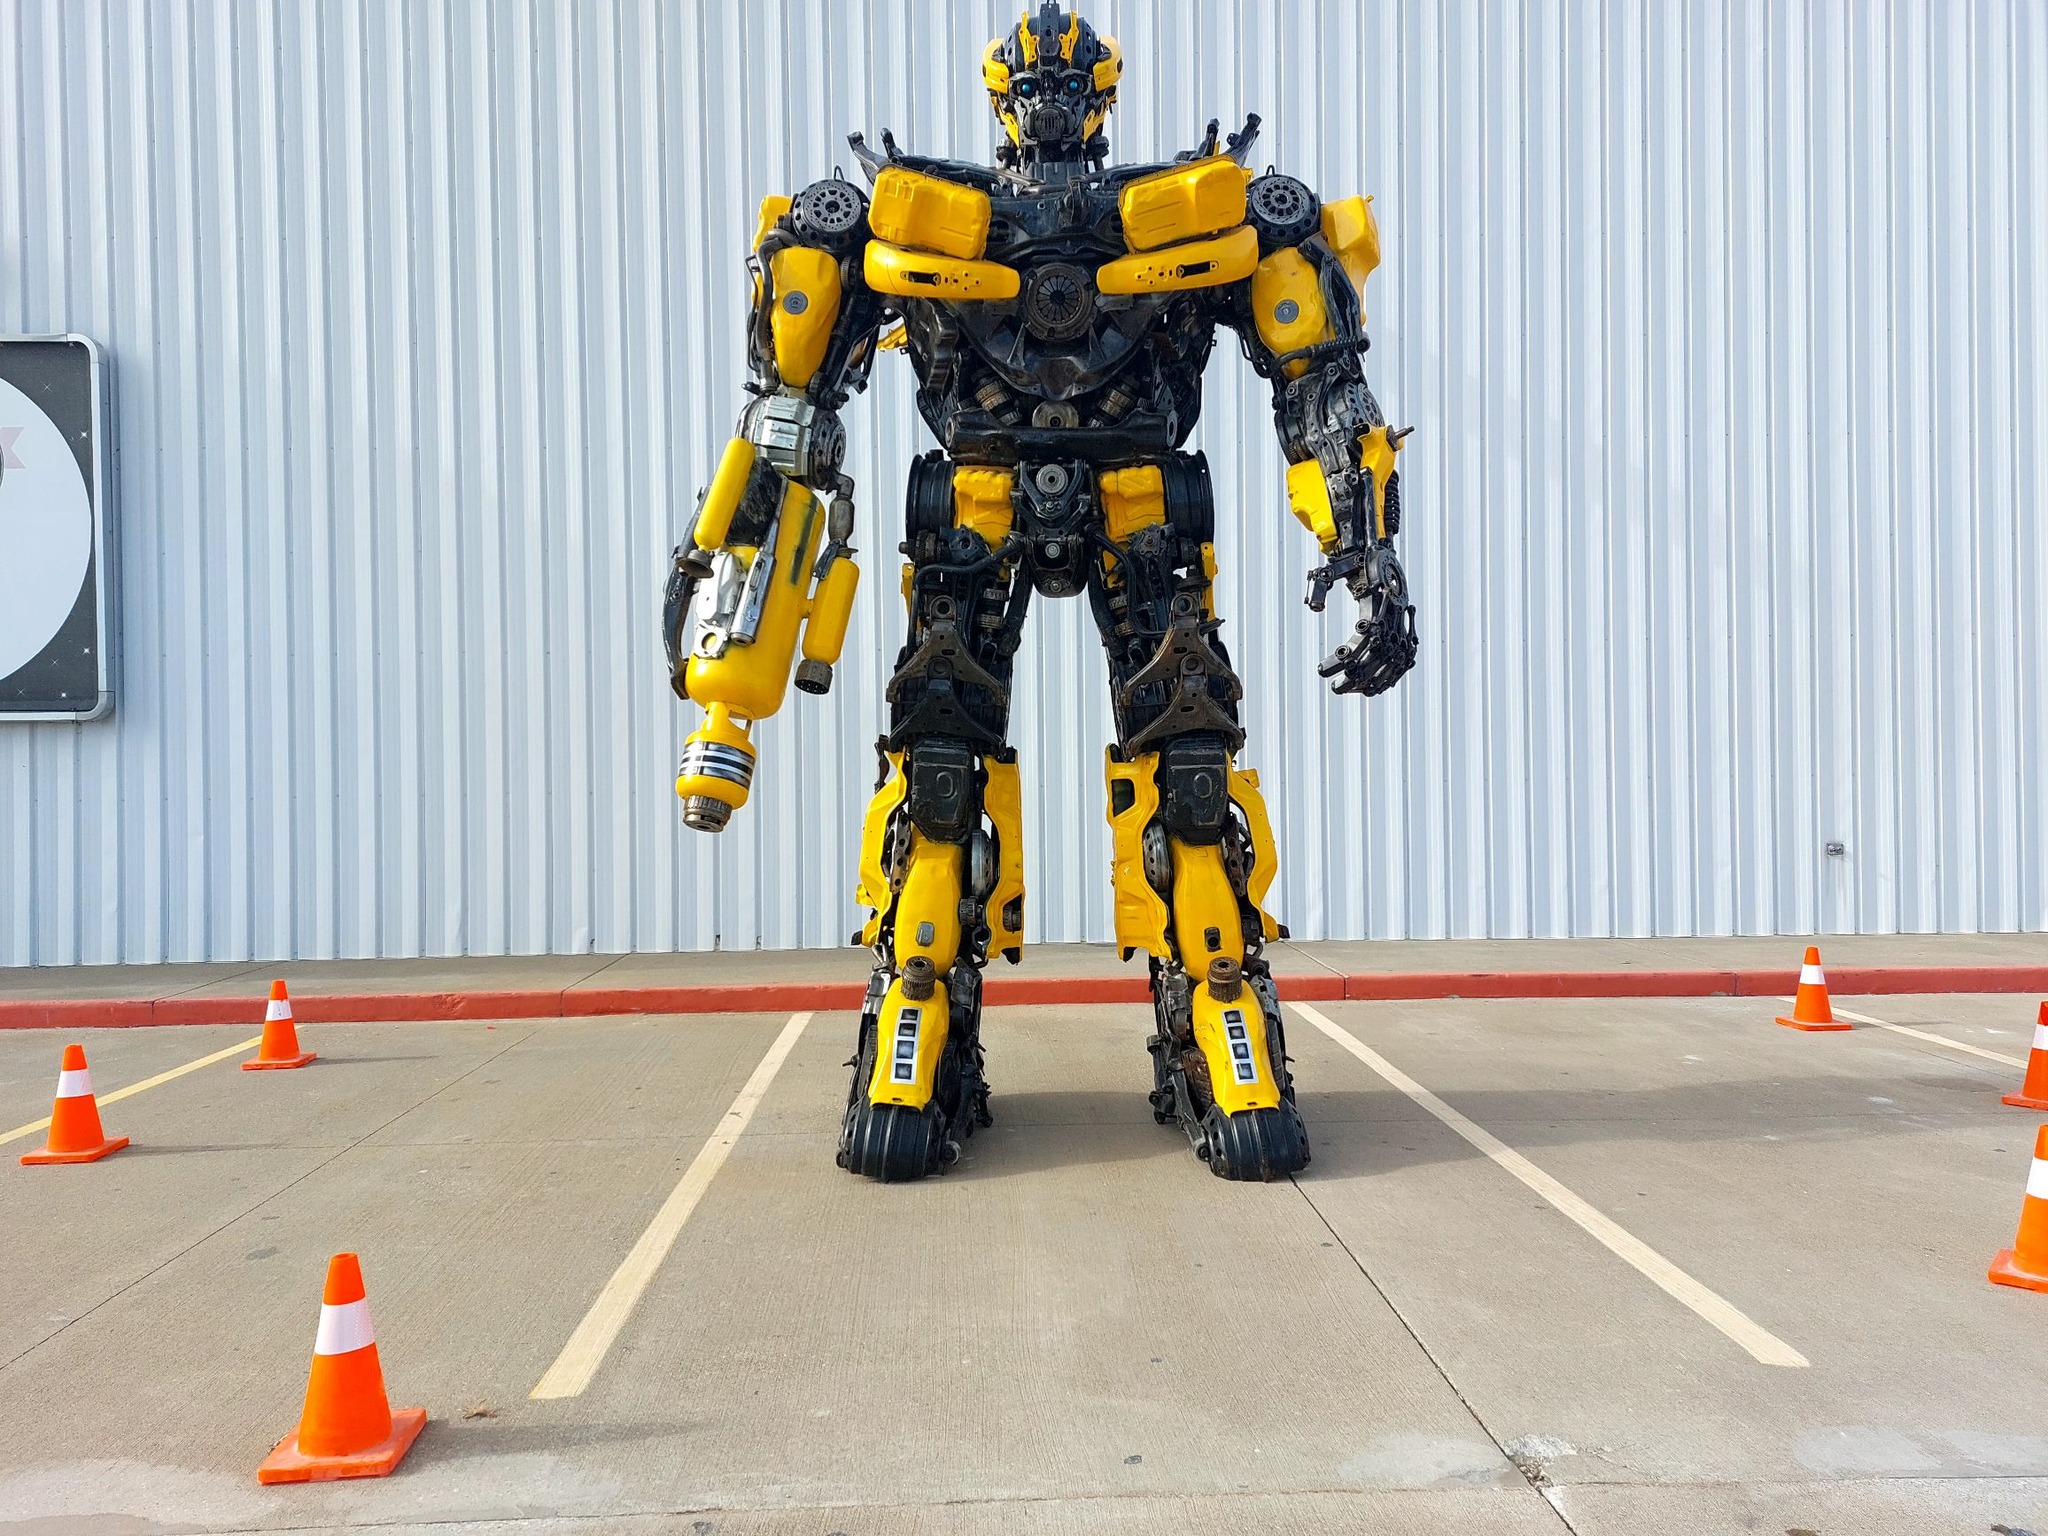 This 16-foot Transformer, Bumblebee, is on one side of the entrance of the Fireworks Superstore, while Optimus Prime is on the other side.